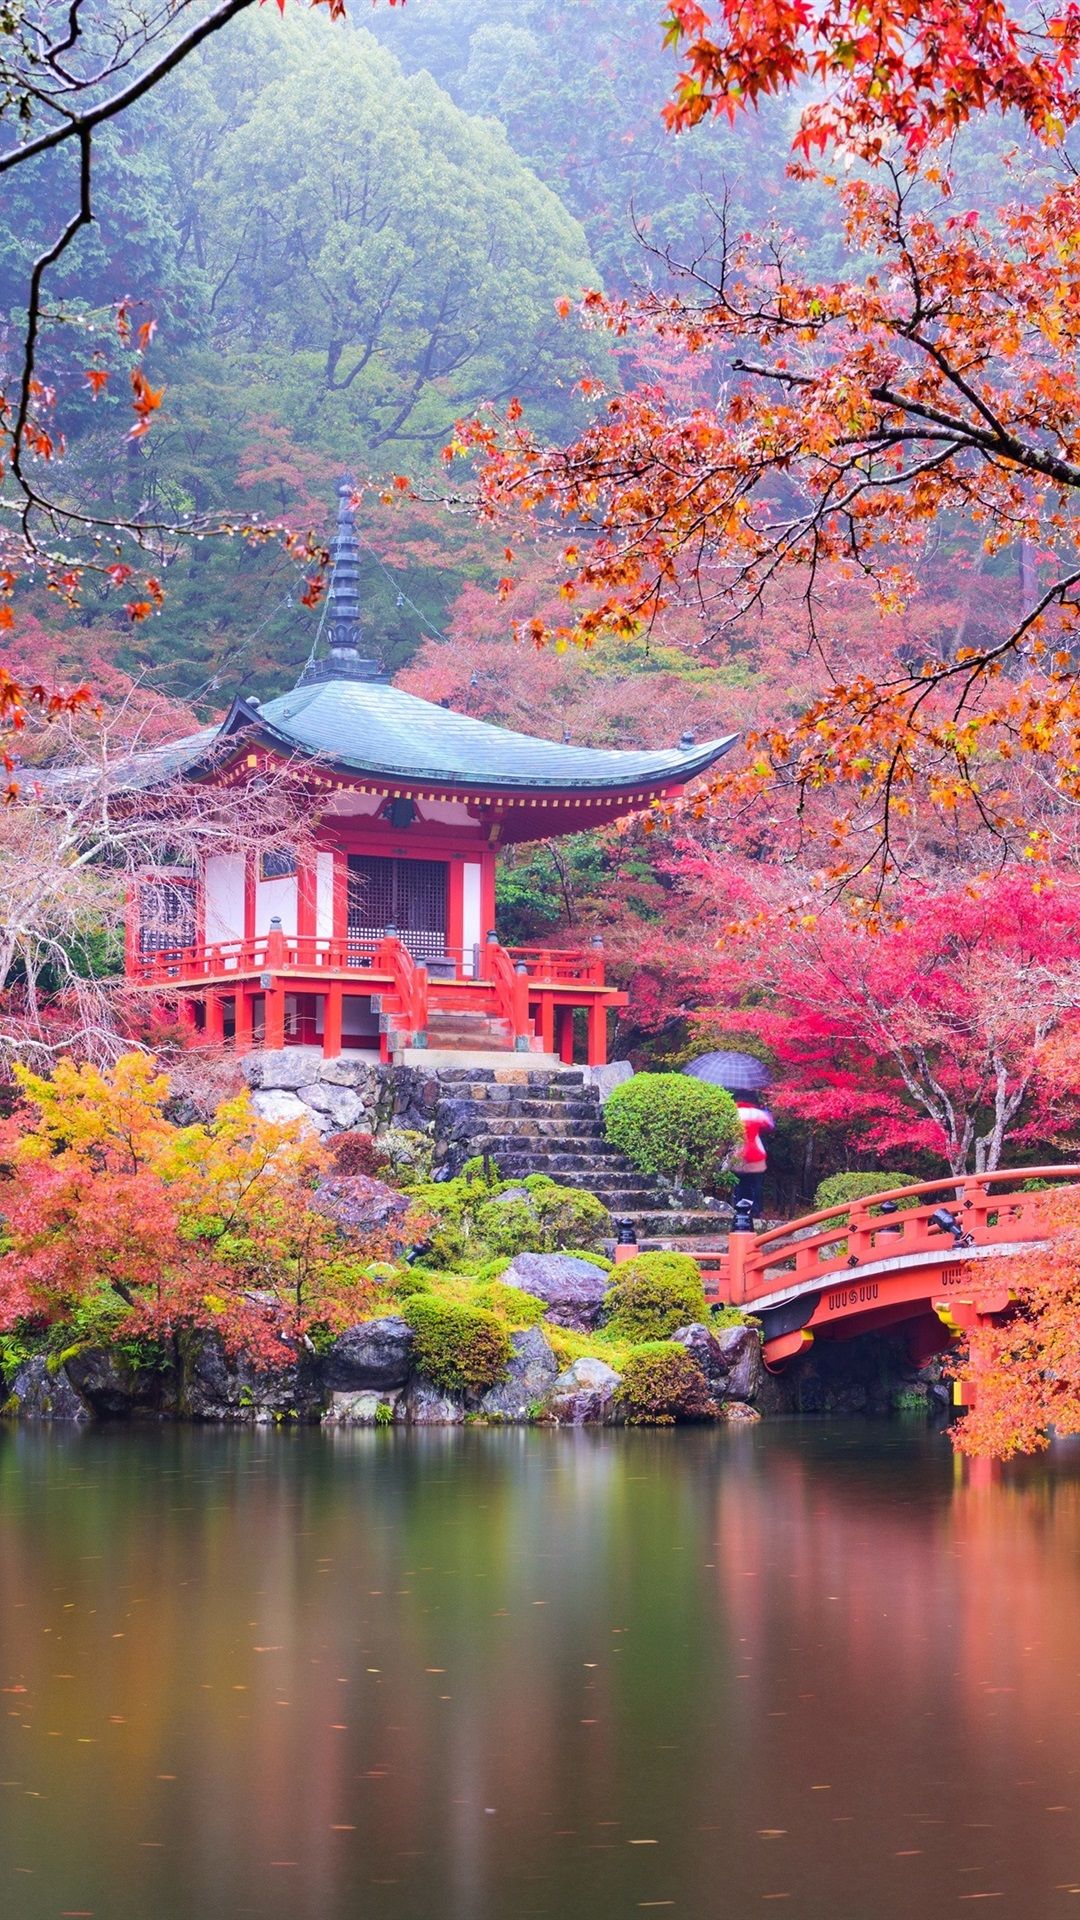 Japan, Kyoto, Park, Pagoda, Colorful Leaves, Trees, Pond, Autumn 1080x1920 IPhone 8 7 6 6S Plus Wallpaper, Background, Picture, Image